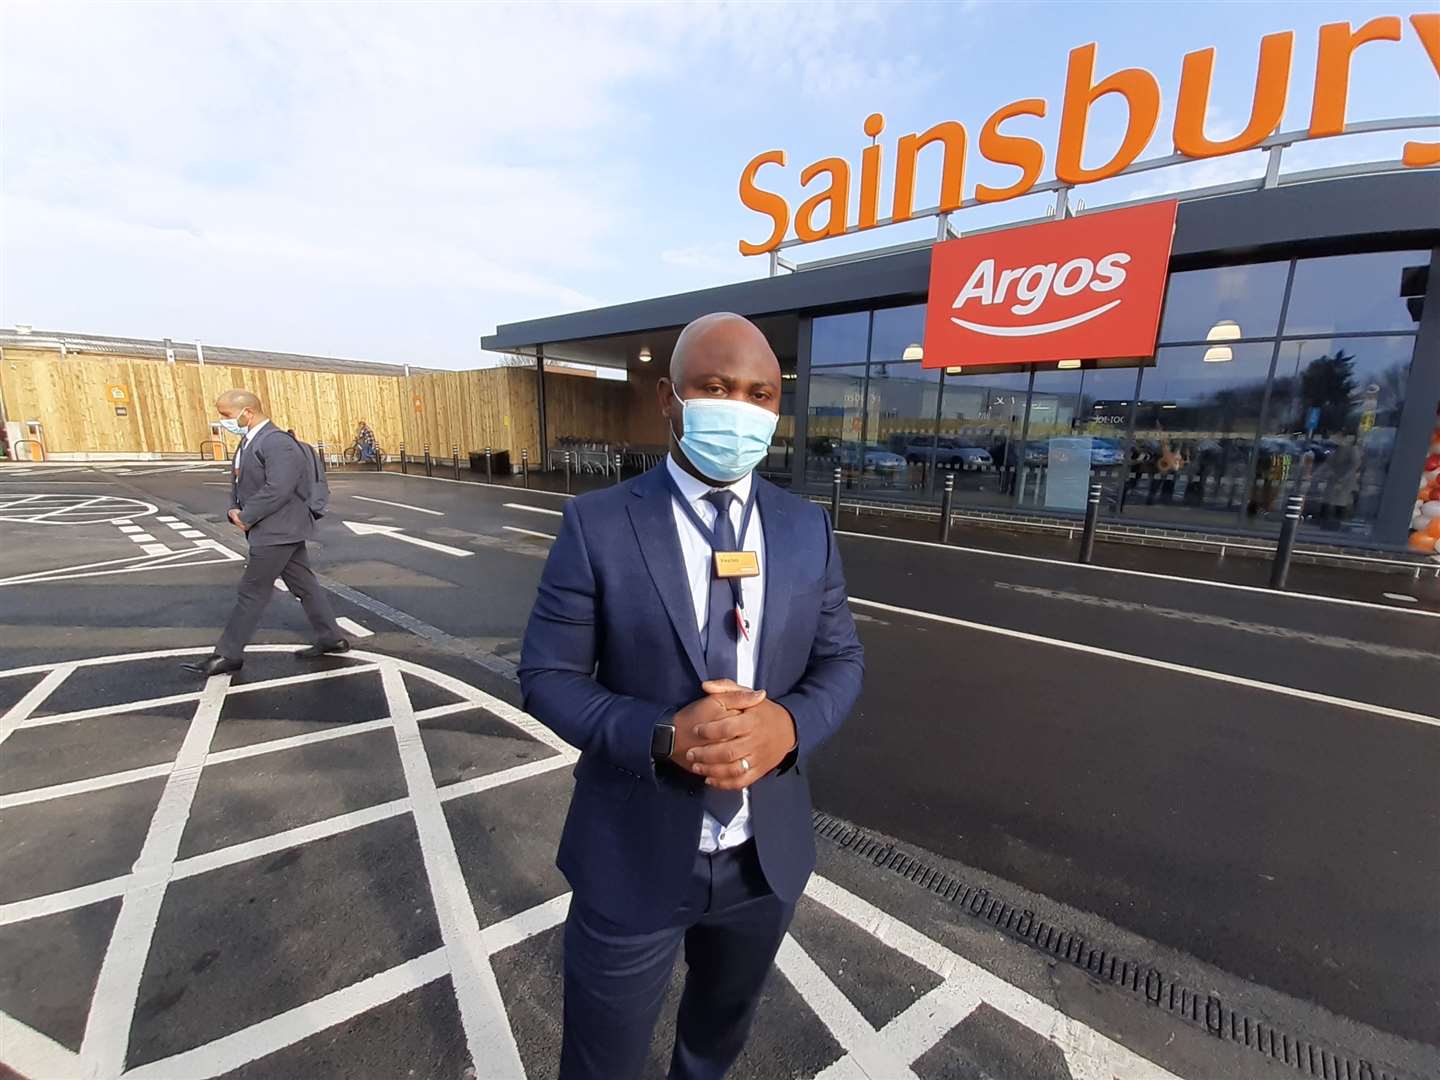 Opening day at Sainsbury's with store manager Kwadwo Osei